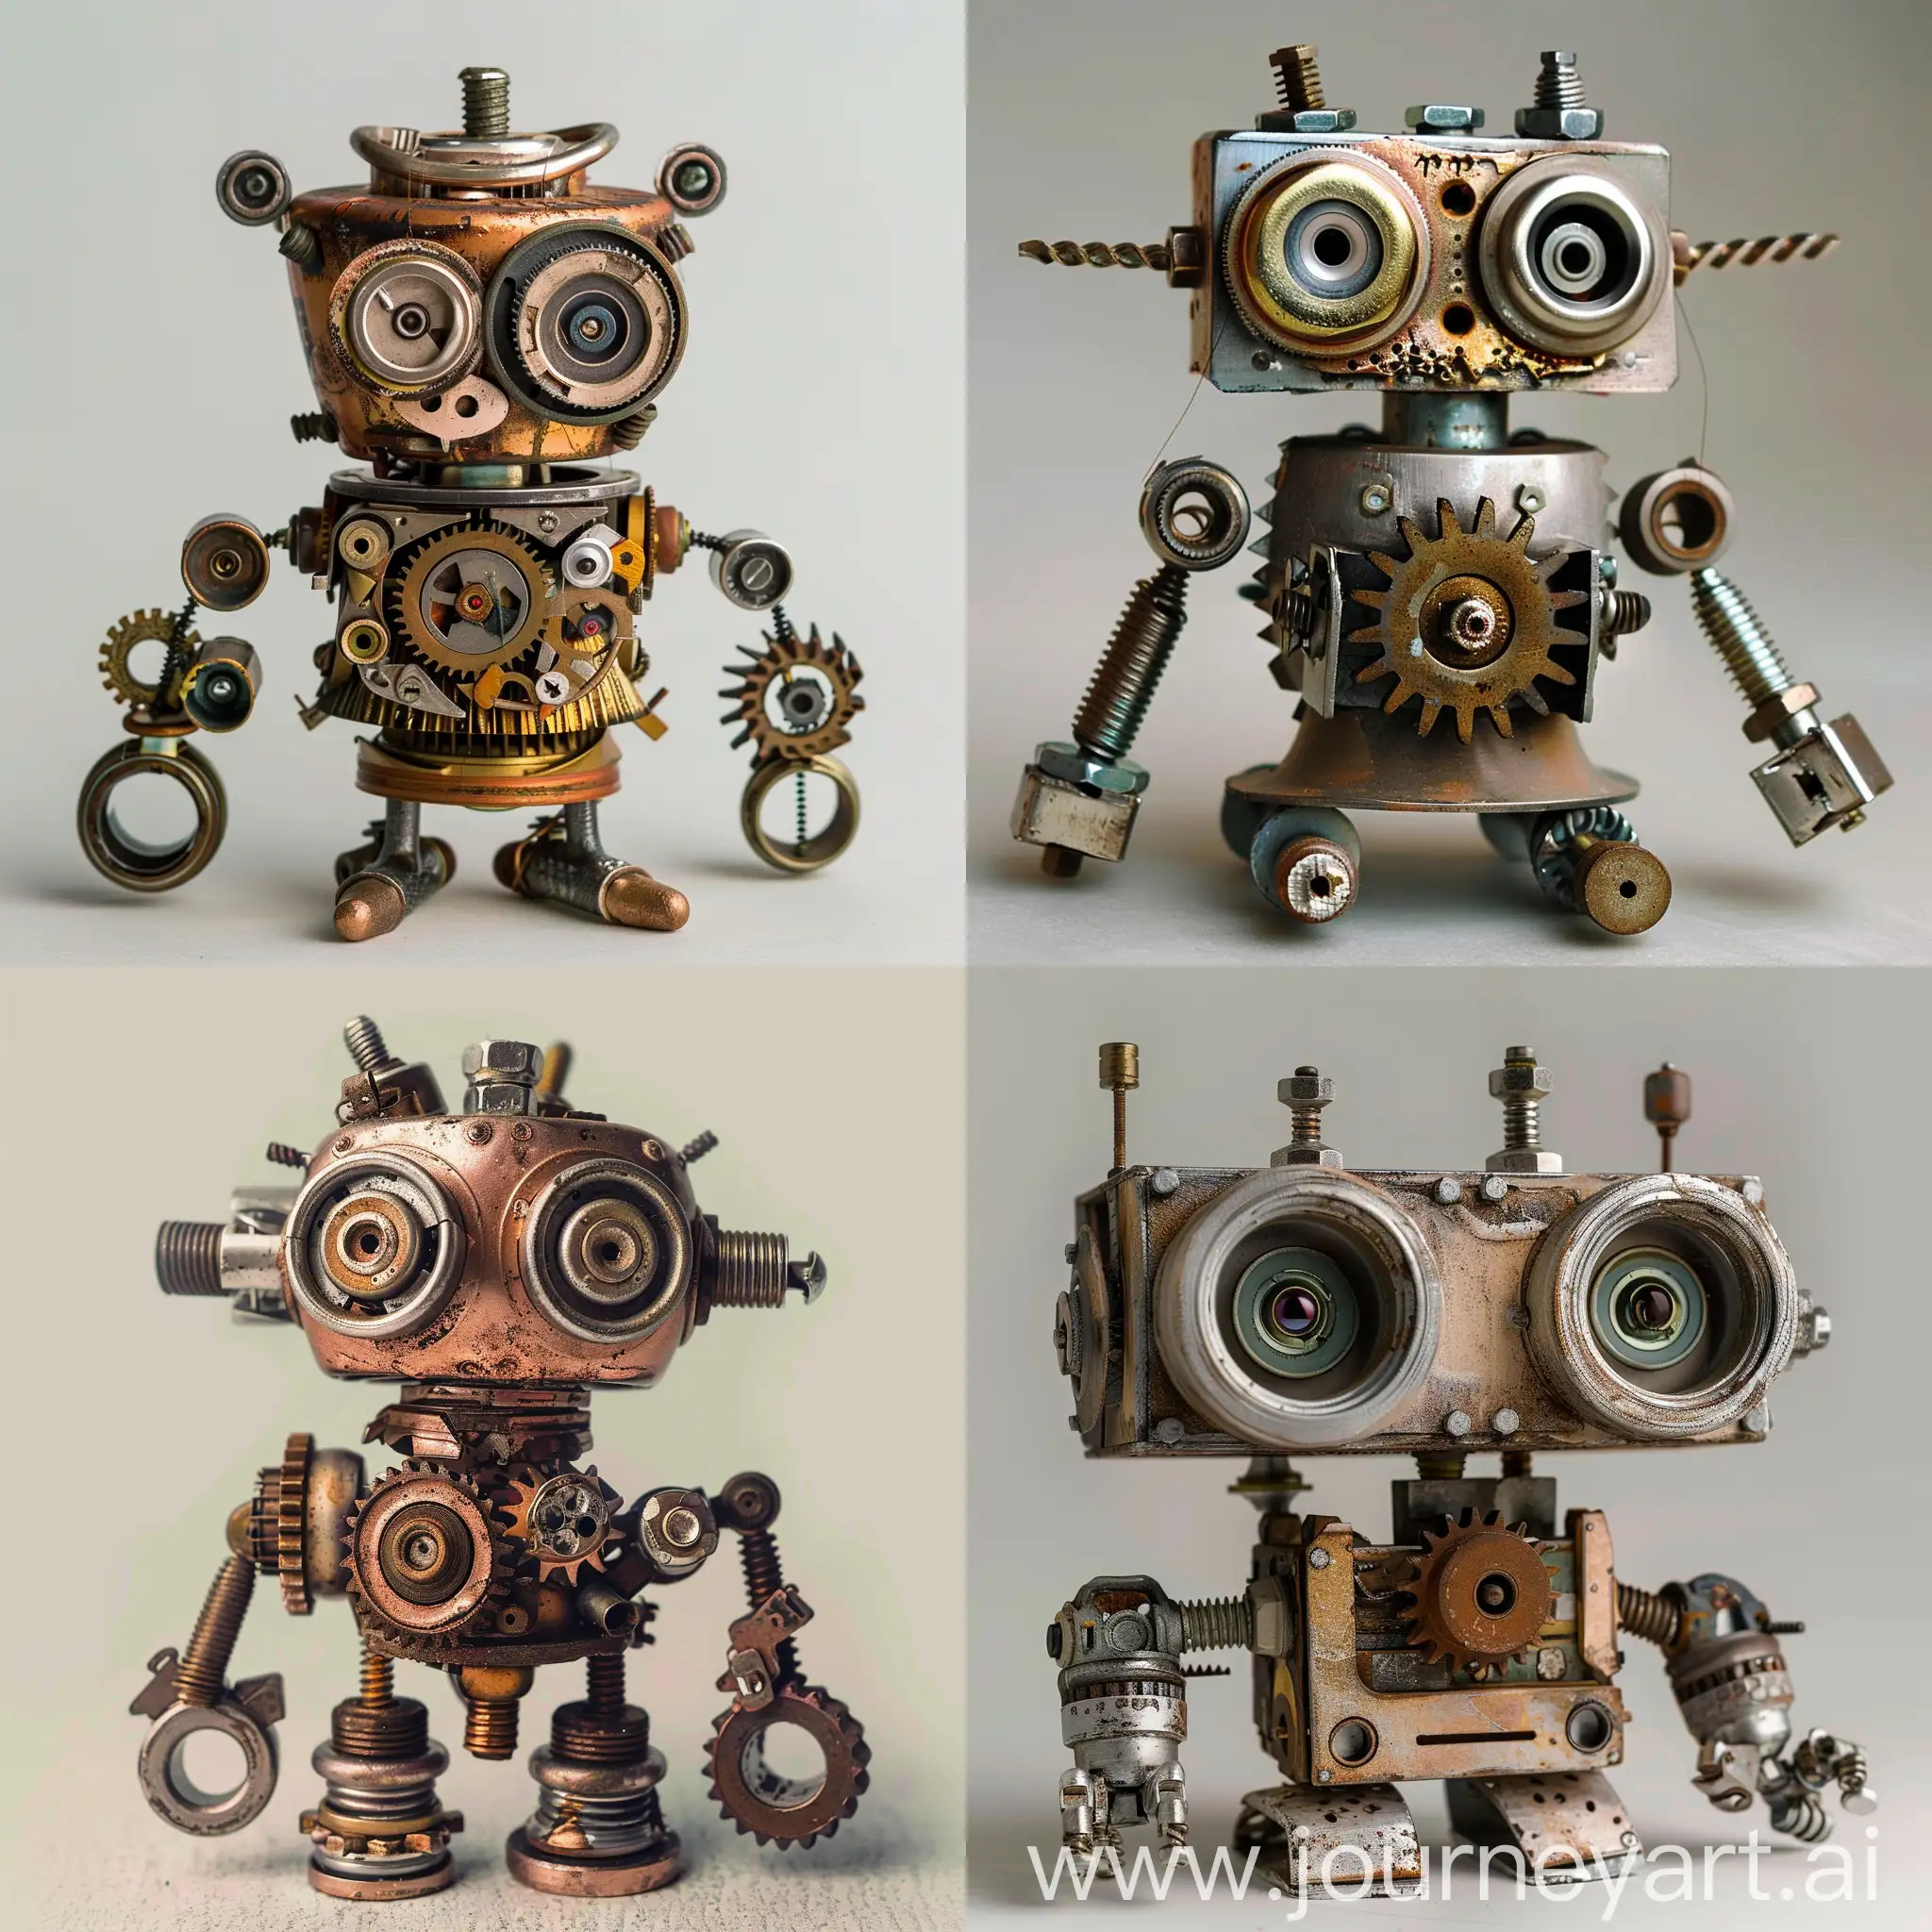 Whimsical-Small-Robot-Sculpture-Made-from-Machinery-Parts